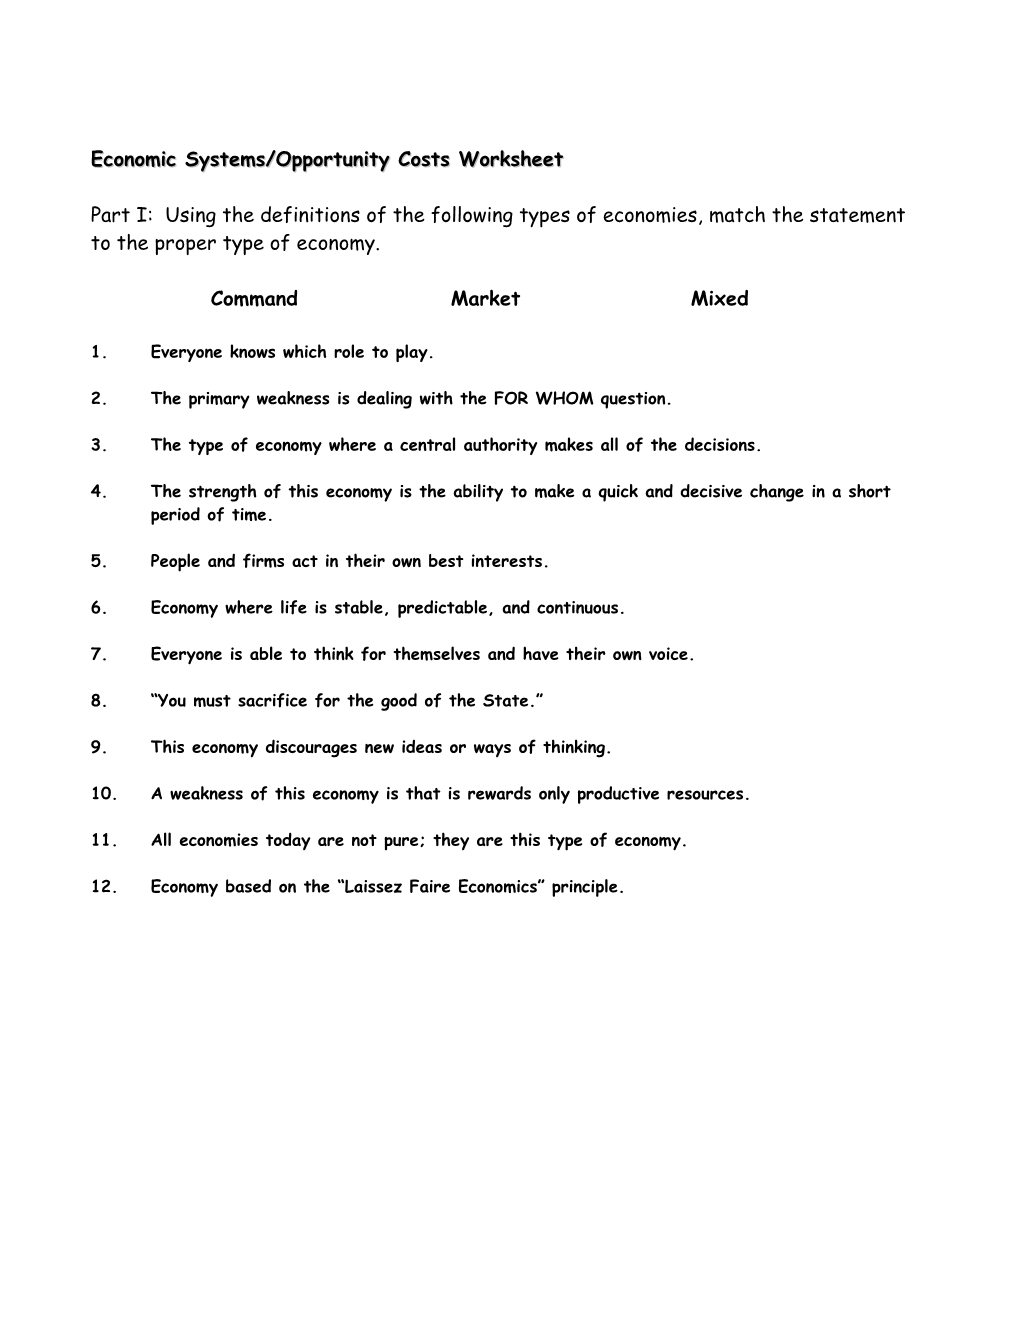 Economic Systems/Opportunity Costs Worksheet